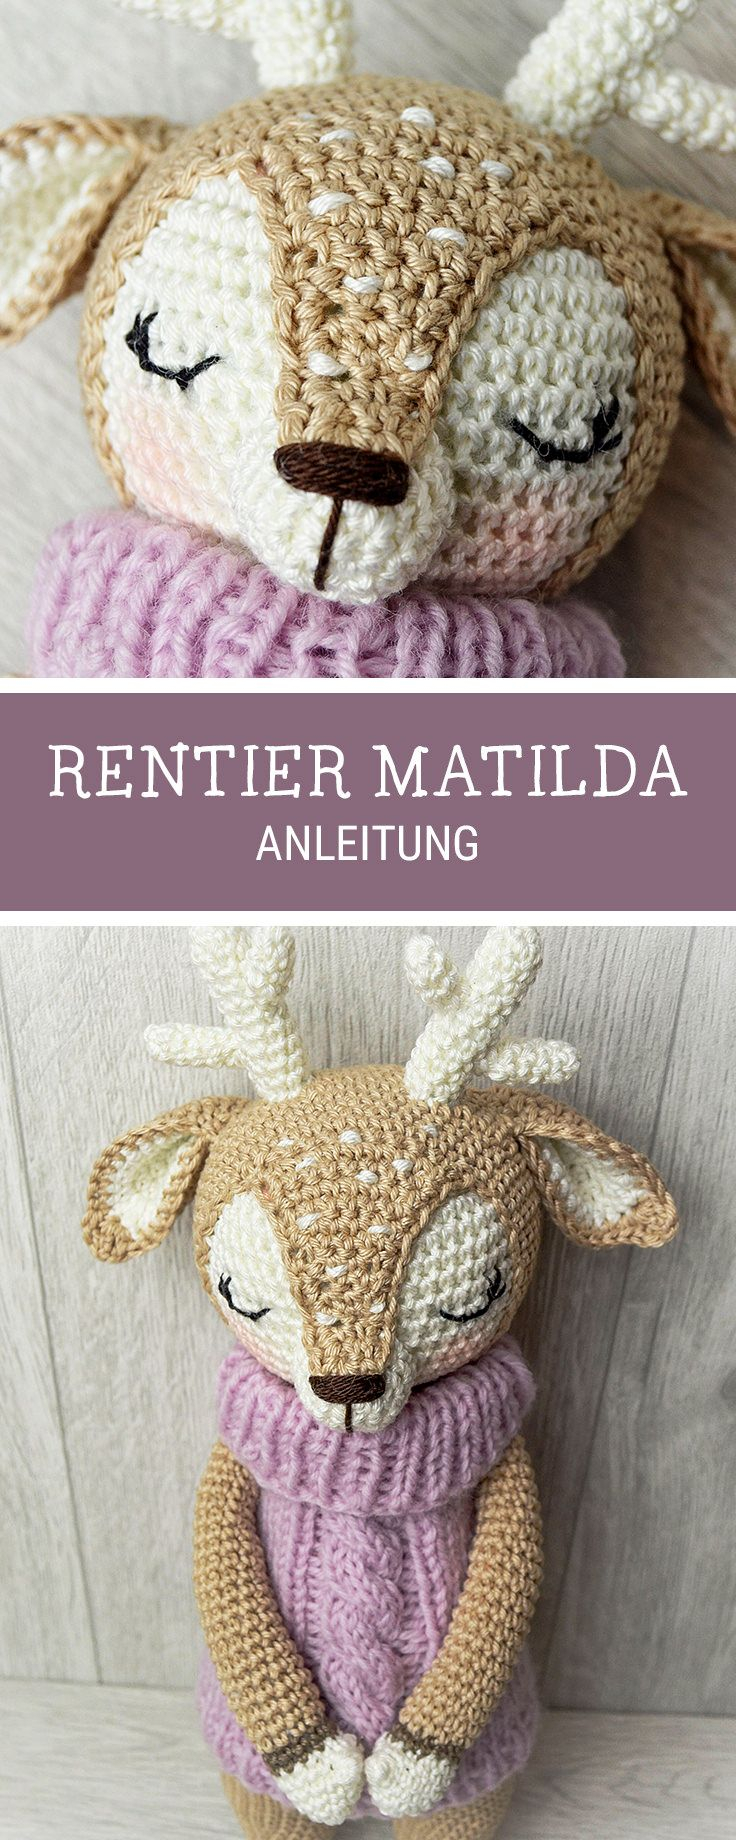 Knitting Pattern Free Download Knitting Patterns For Ba Yarns Pdf Download For The Amigurumi